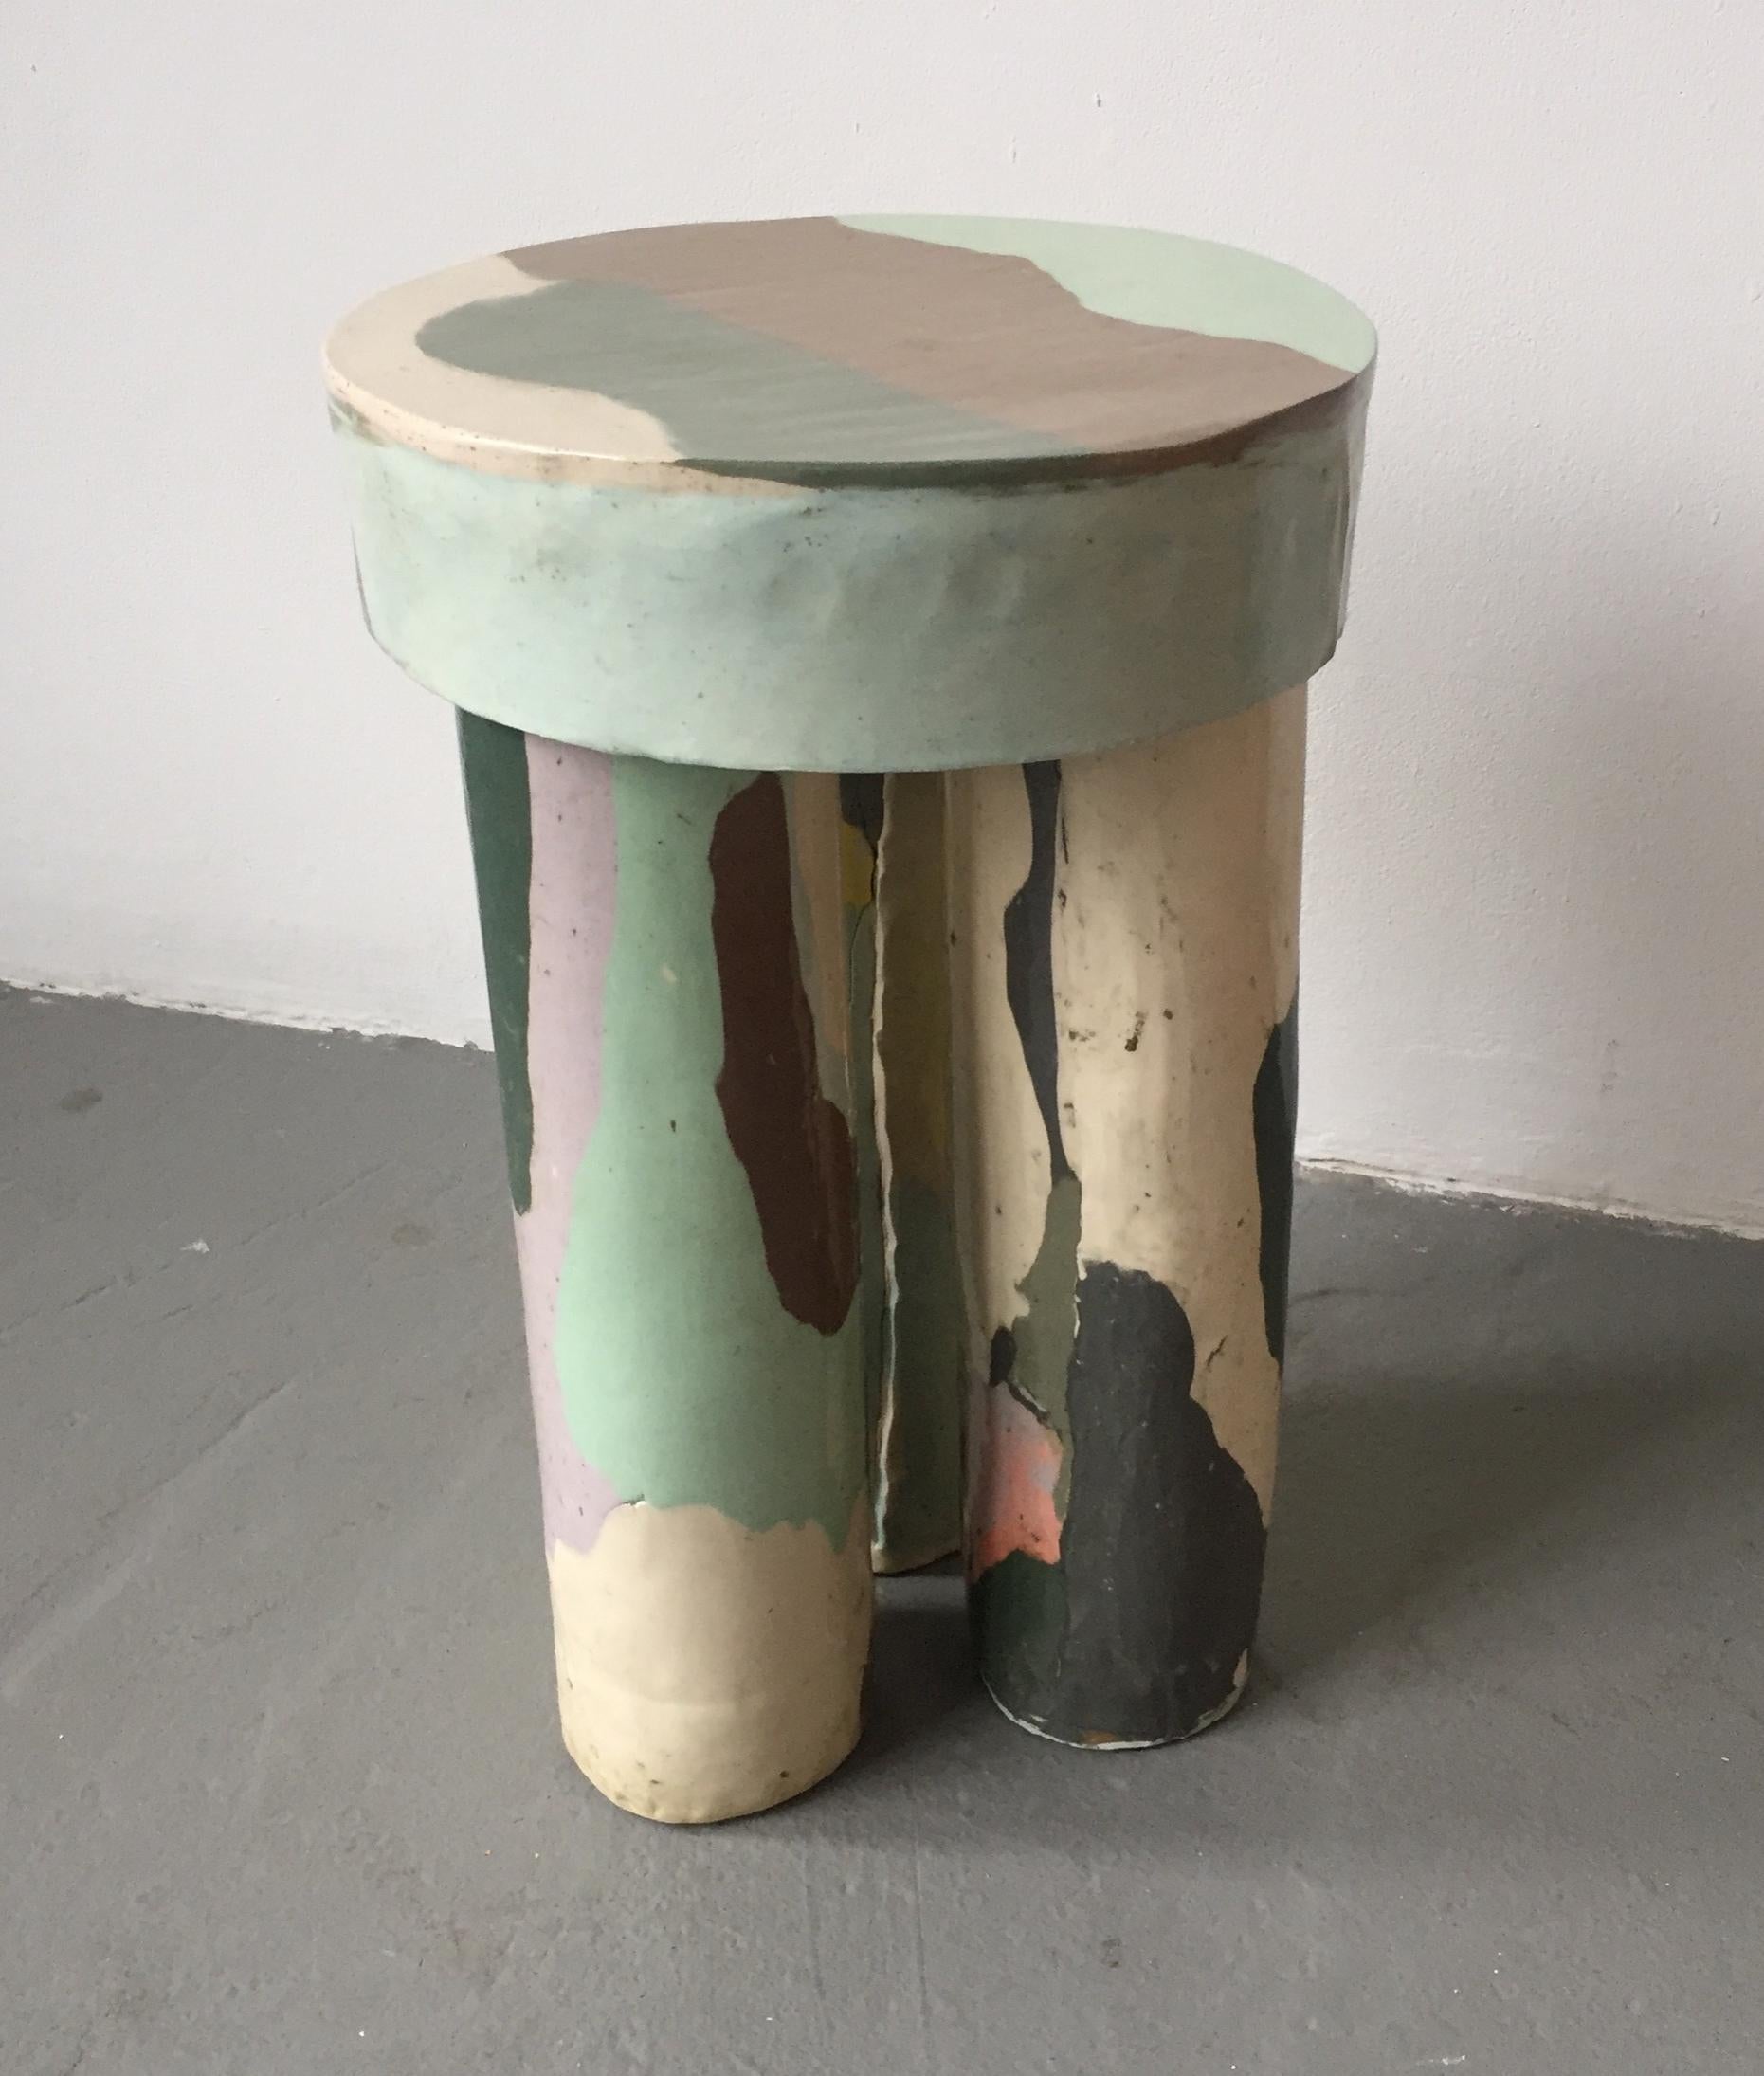 Unique stool in hand-built and glazed ceramic. Designed by Katie Stout, USA, 2018.
 